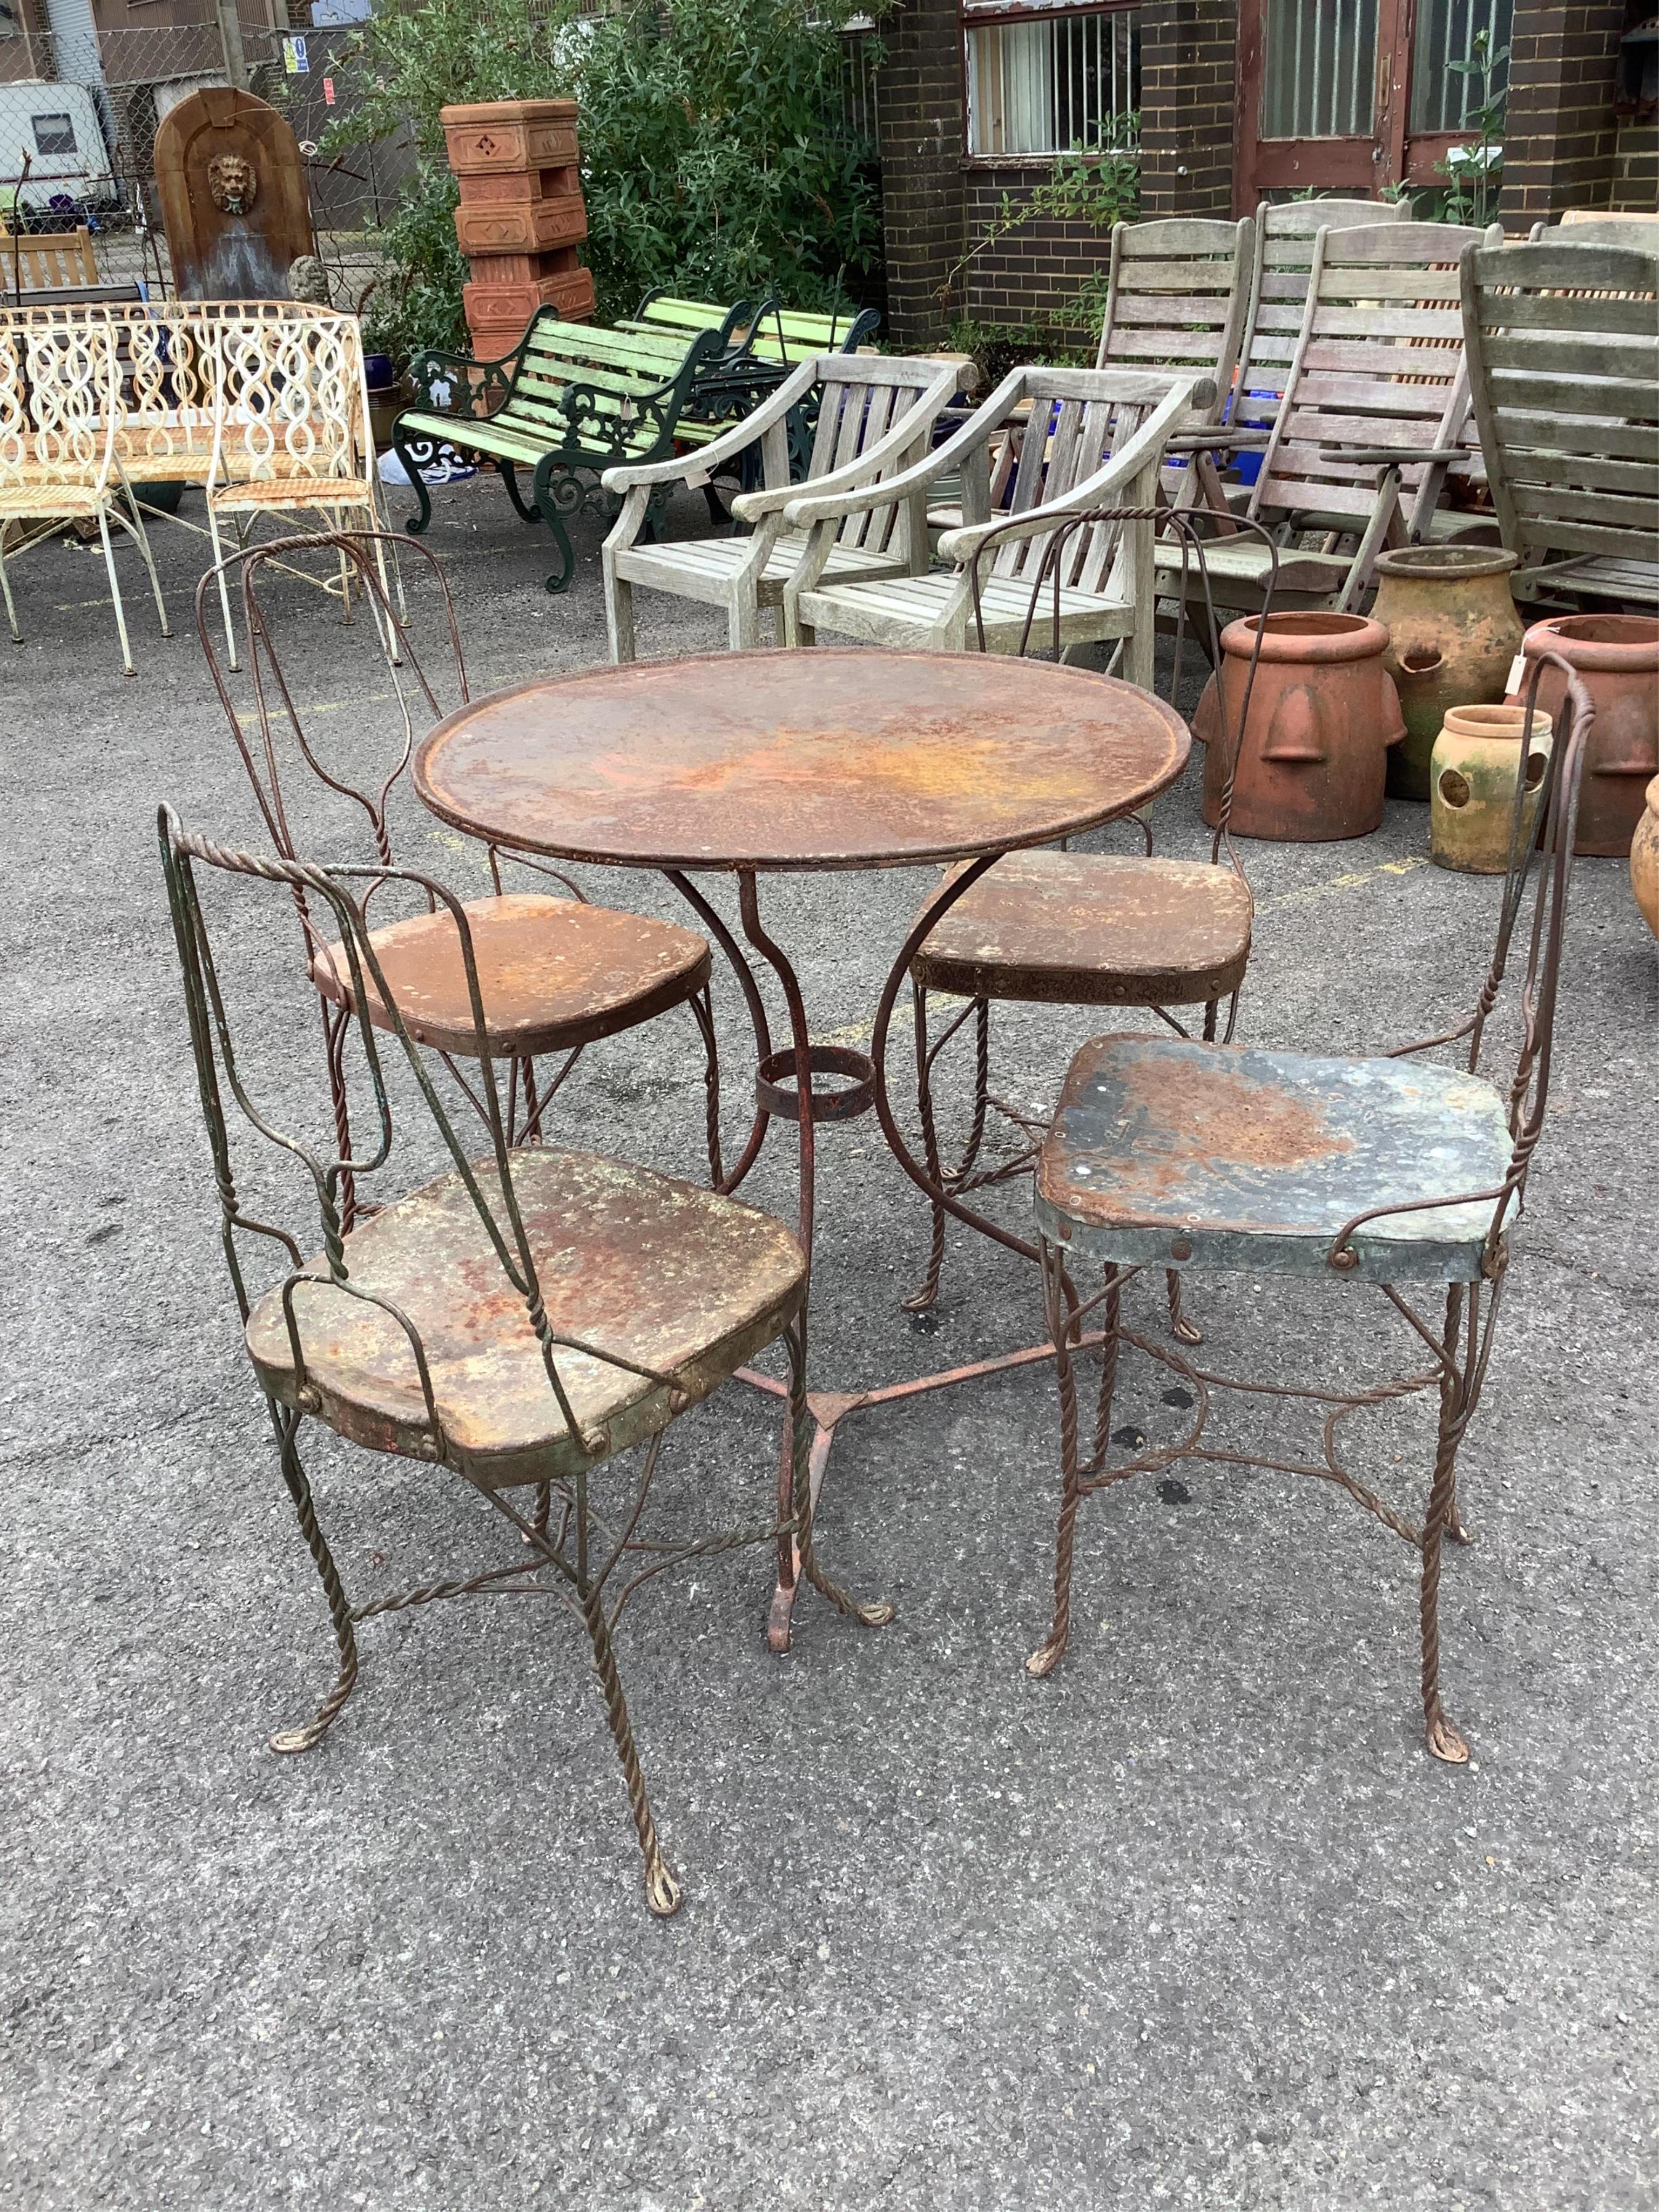 An early 20th century wrought iron garden table, diameter 70cm, height 75cm and four chairs. Condition - fair